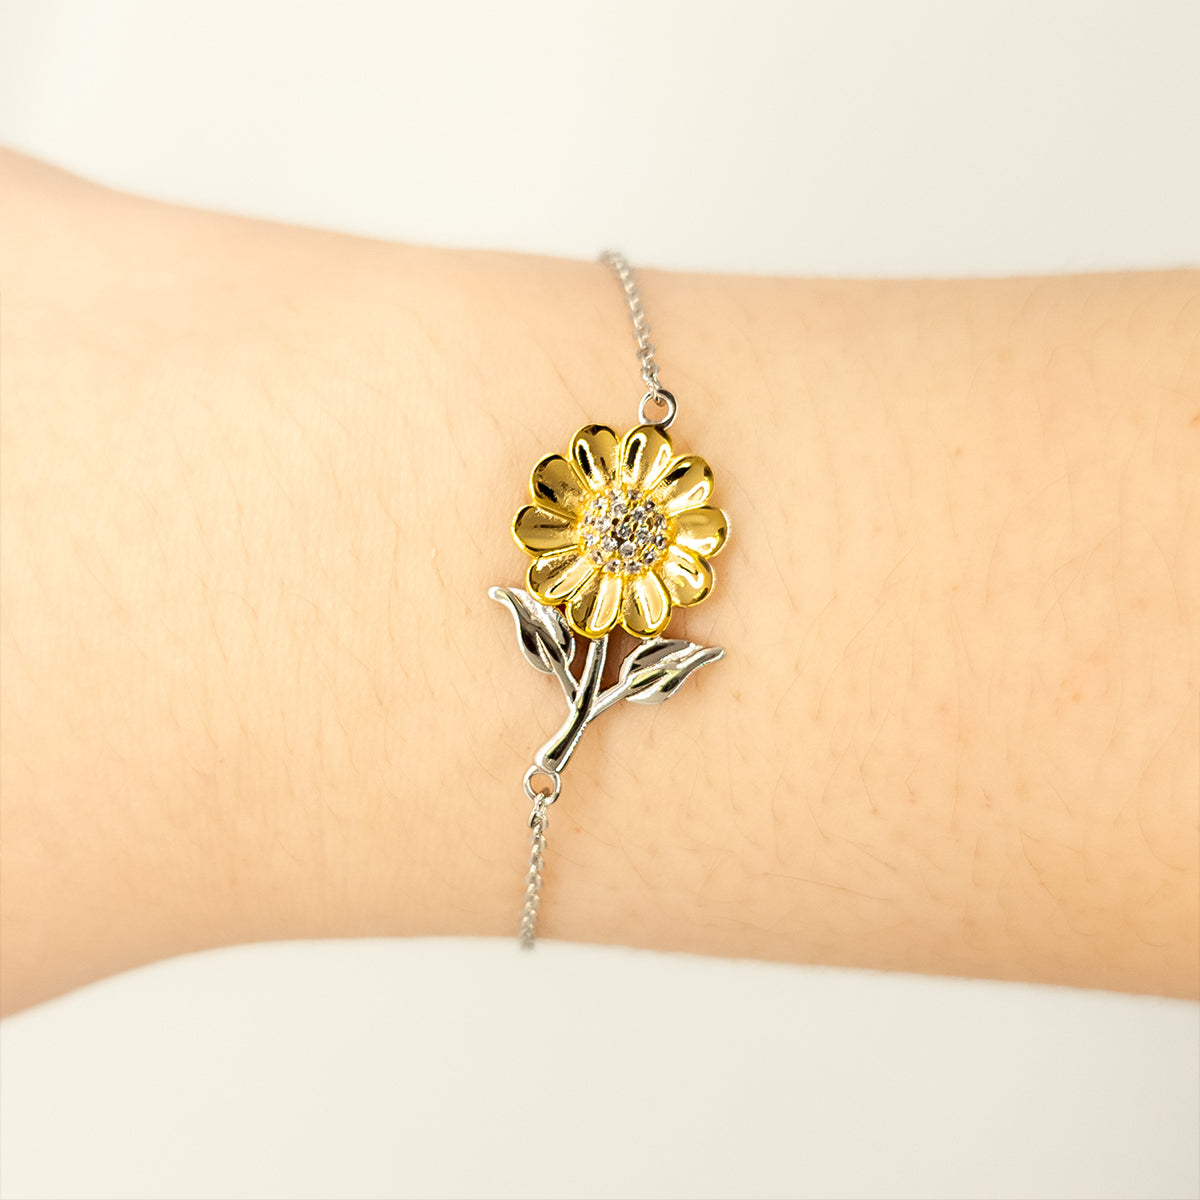 Nonna Sunflower Bracelet - You will always have a special place - Engraved Gift for Grandma, Birthday, Christmas, Mothers Day, Nonna